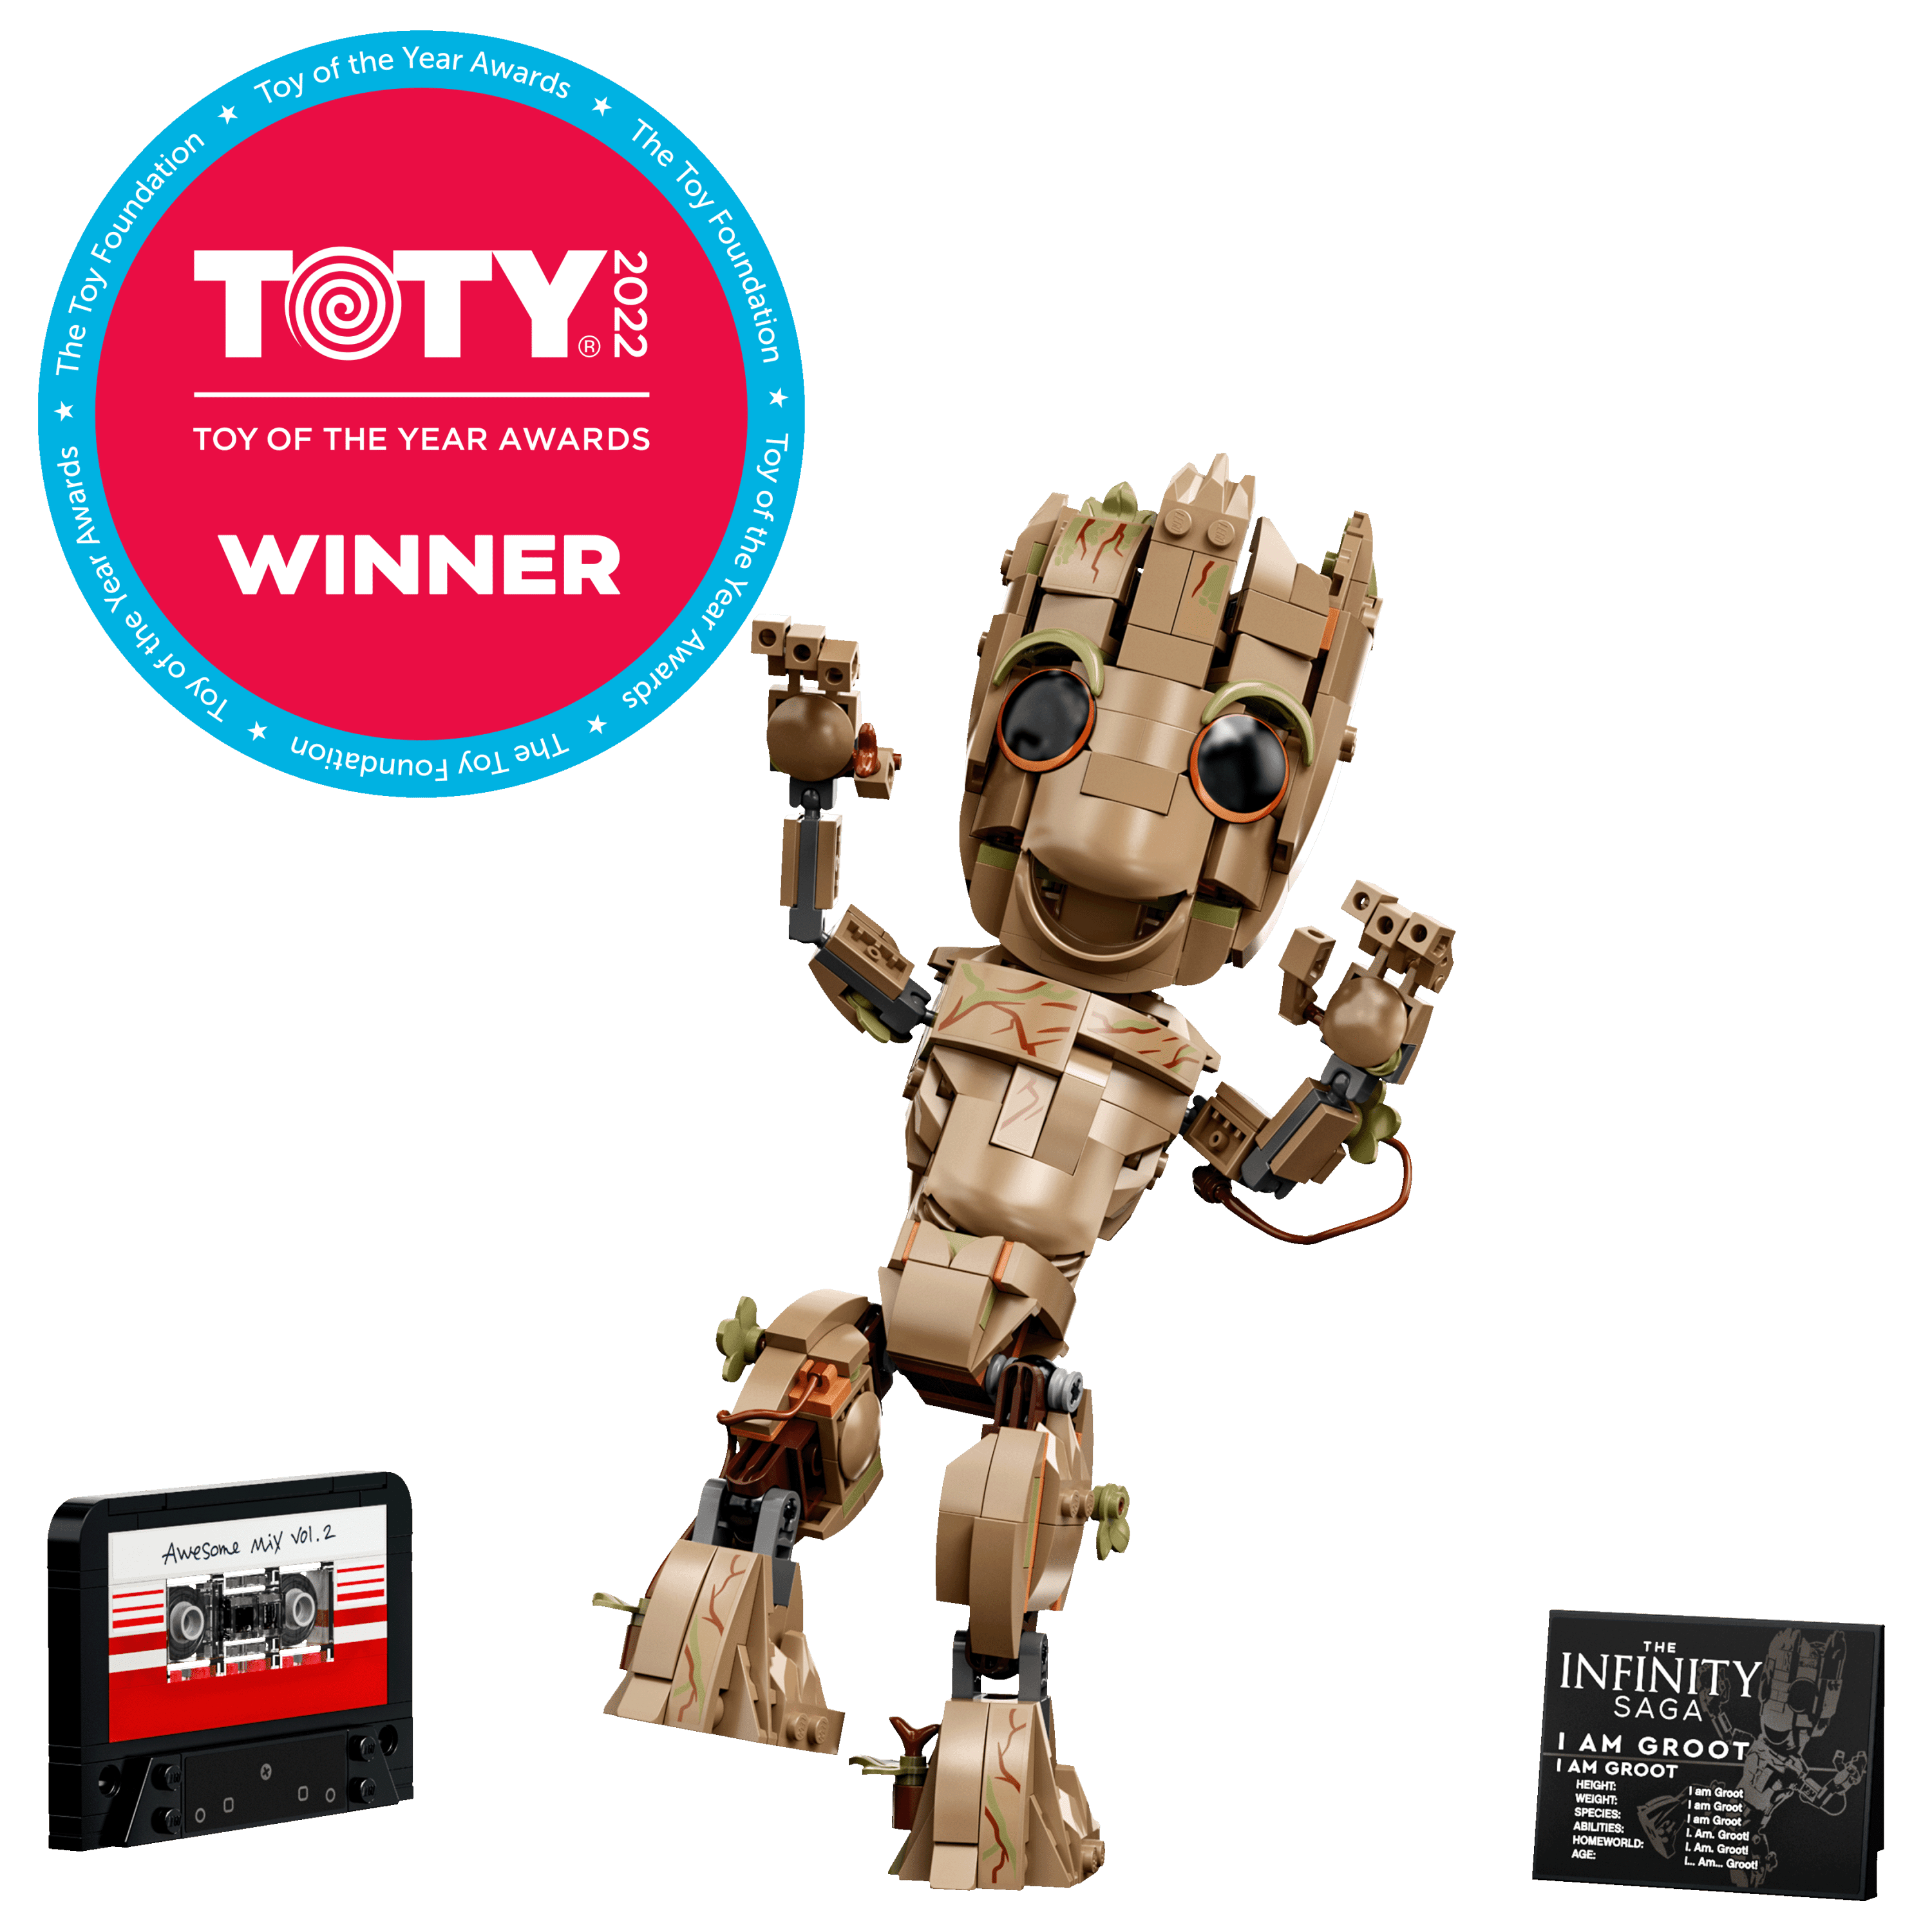 LEGO Marvel I am Groot Buildable Toy, 76217 Guardians of the Galaxy 2 Set, Collectable Baby Groot Model Figure, Gift Idea